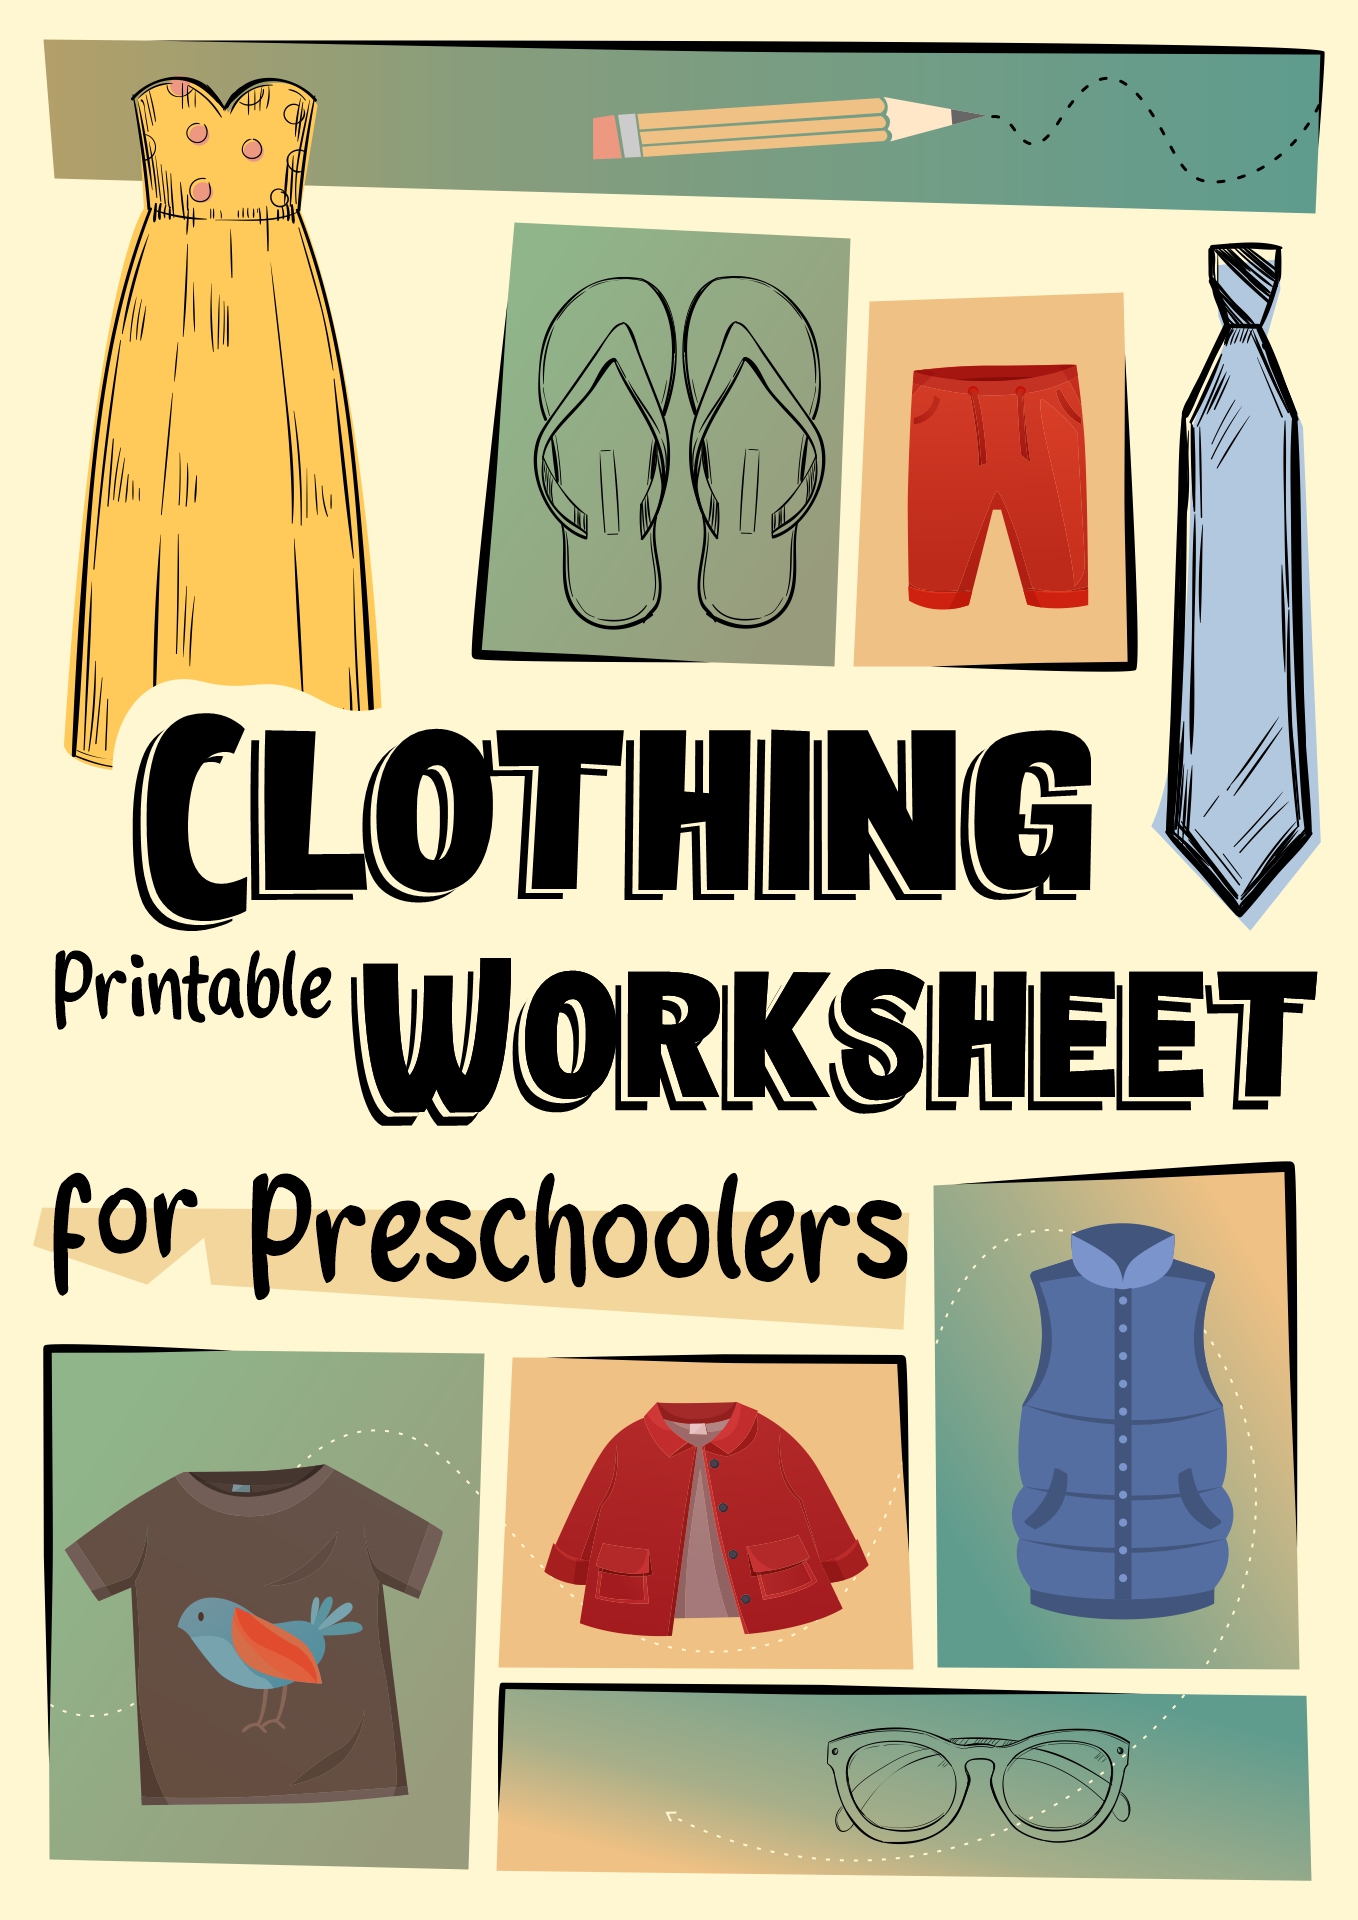 17 Images of Clothing Printable Worksheets For Preschoolers